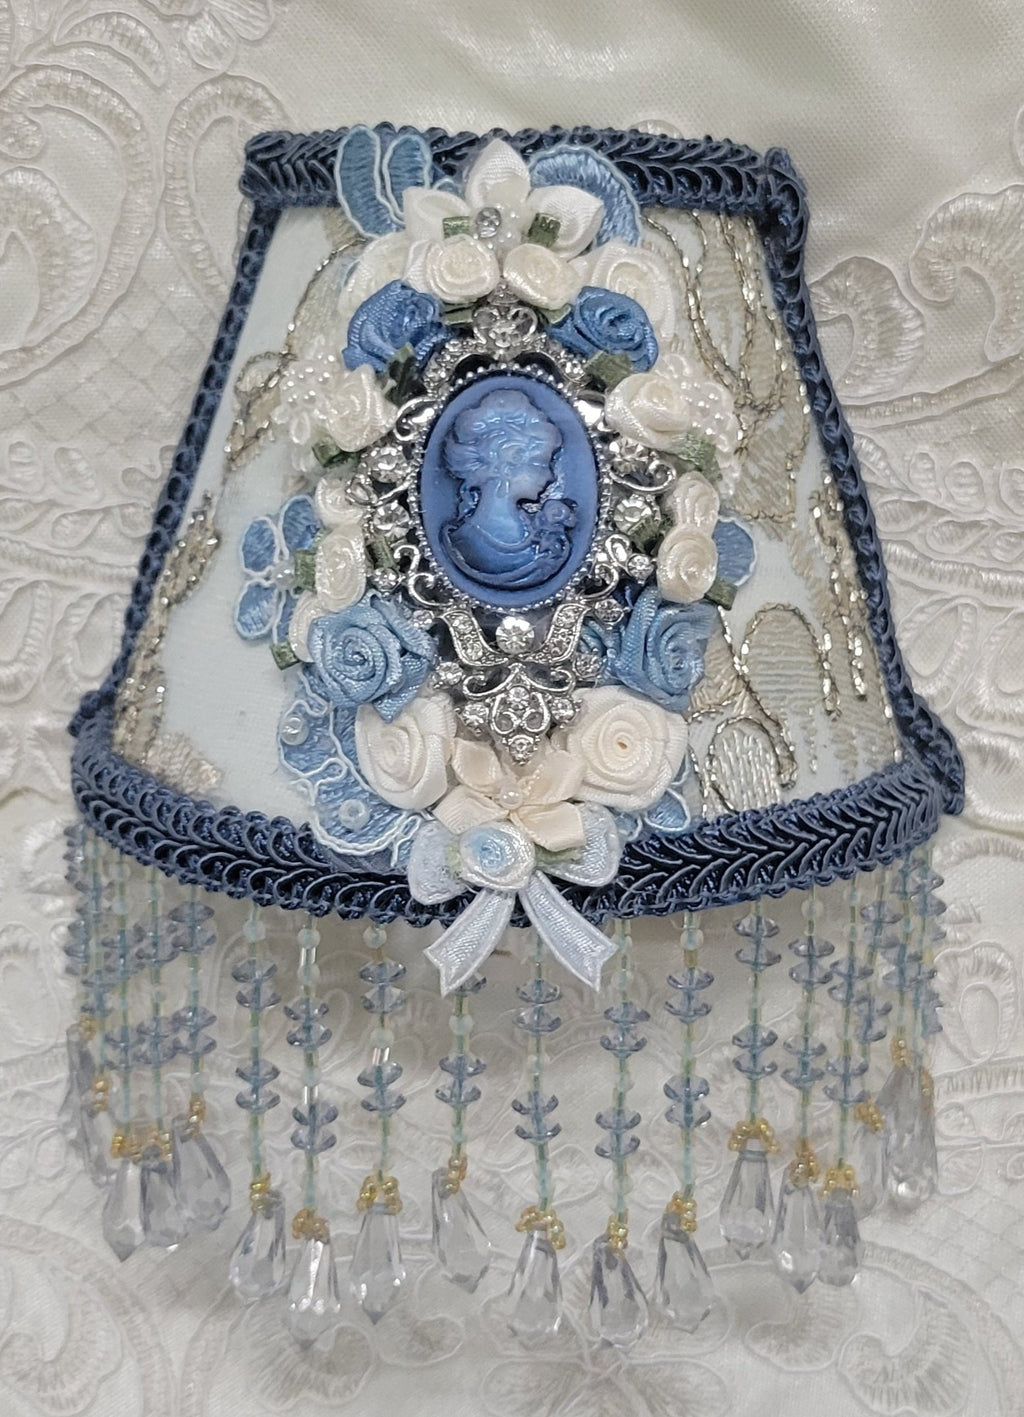 Beautiful Blue & White Victorian Cameo Lace and Hand Beaded Fringe Nightlight (night light) - One of a Kind!